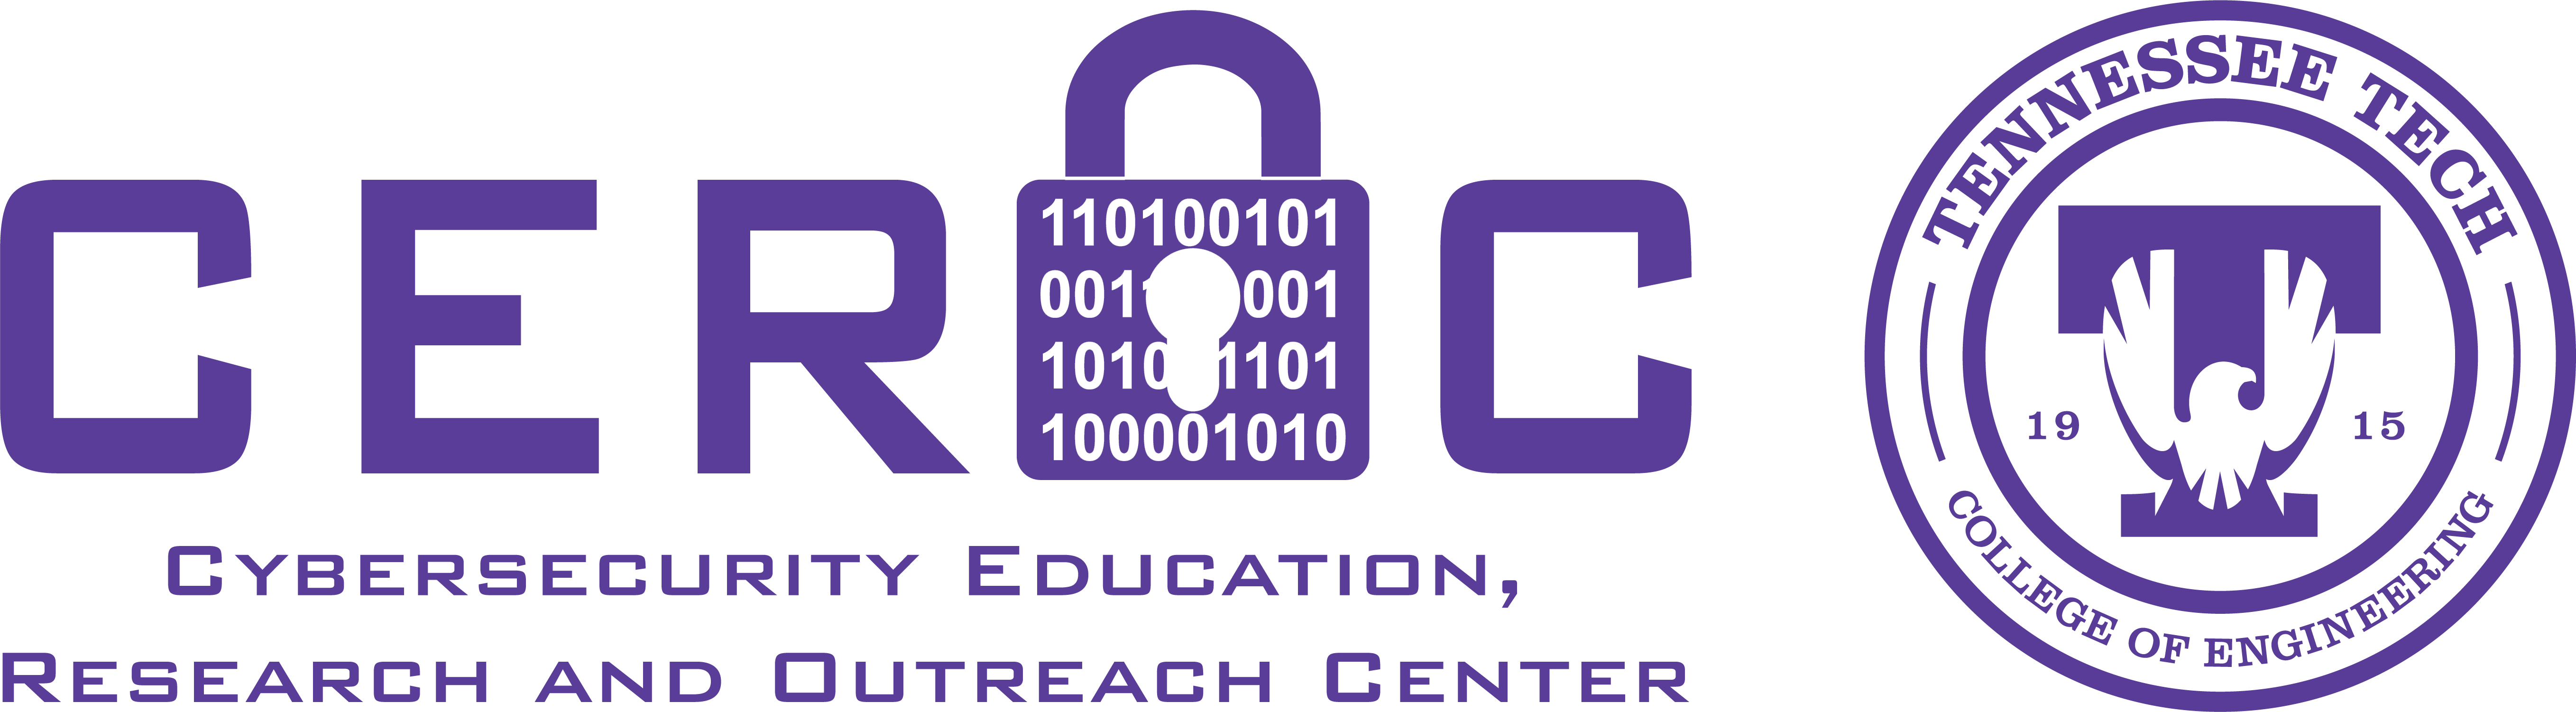 CEROC and College of Engineering Logo